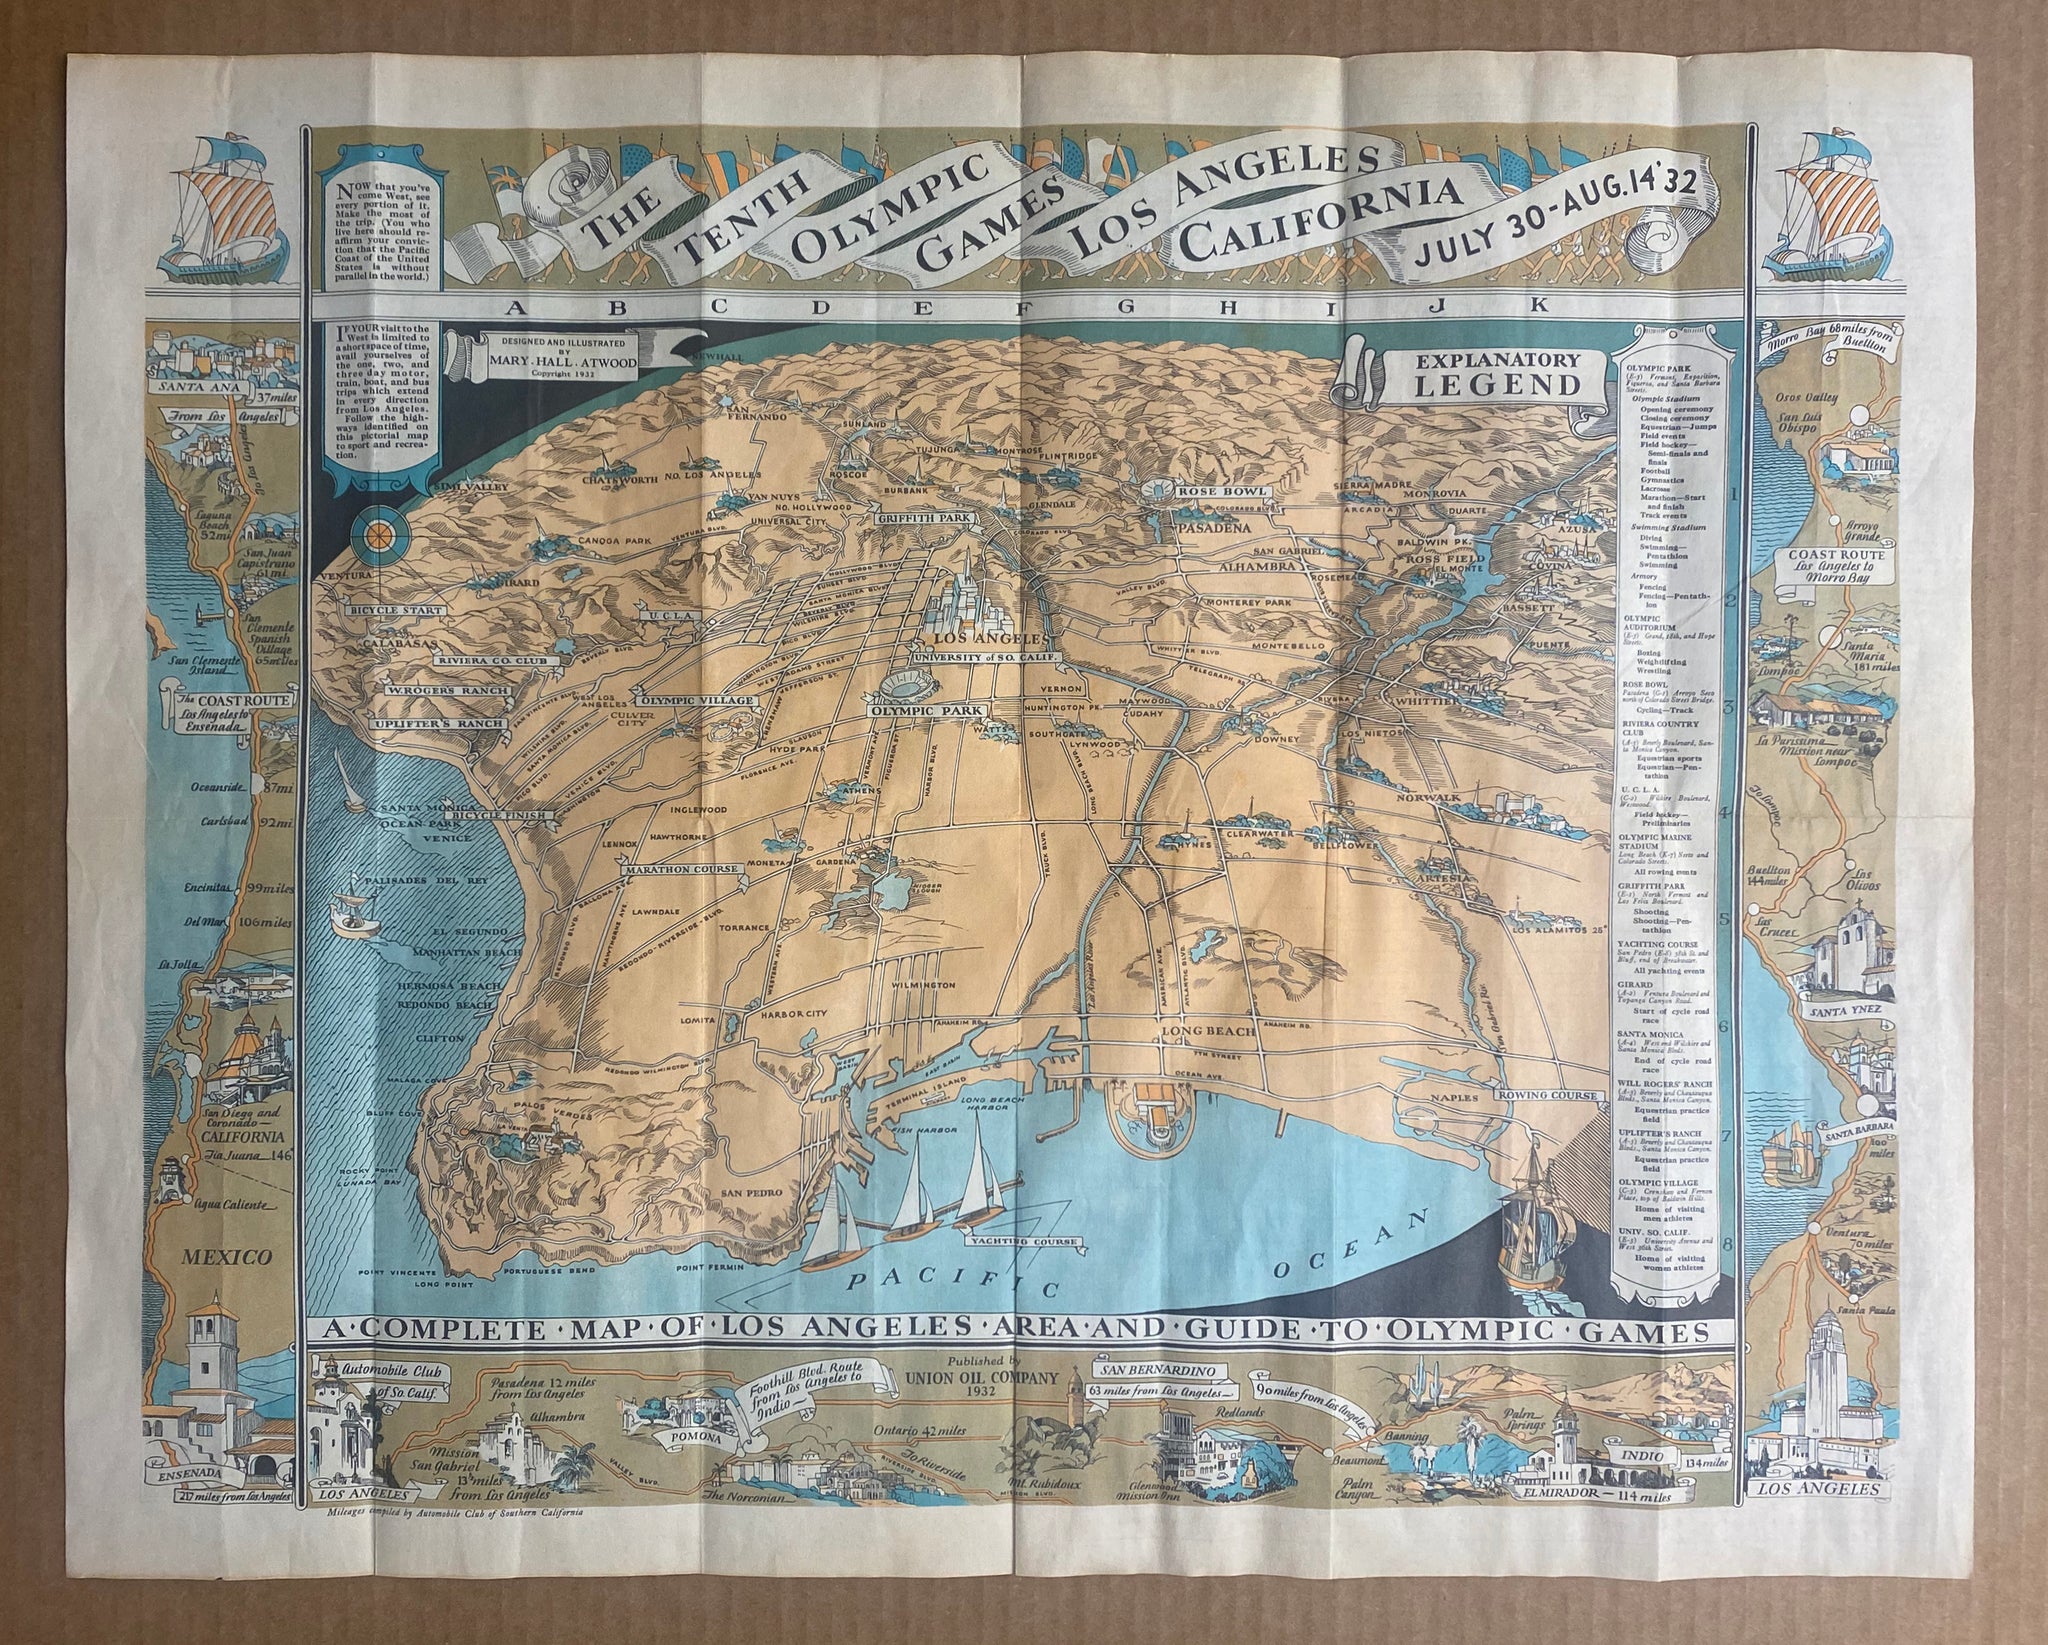 1932 Union Oil Co Los Angeles Olympic Games Pictorial Map Mary Hall Atwood California